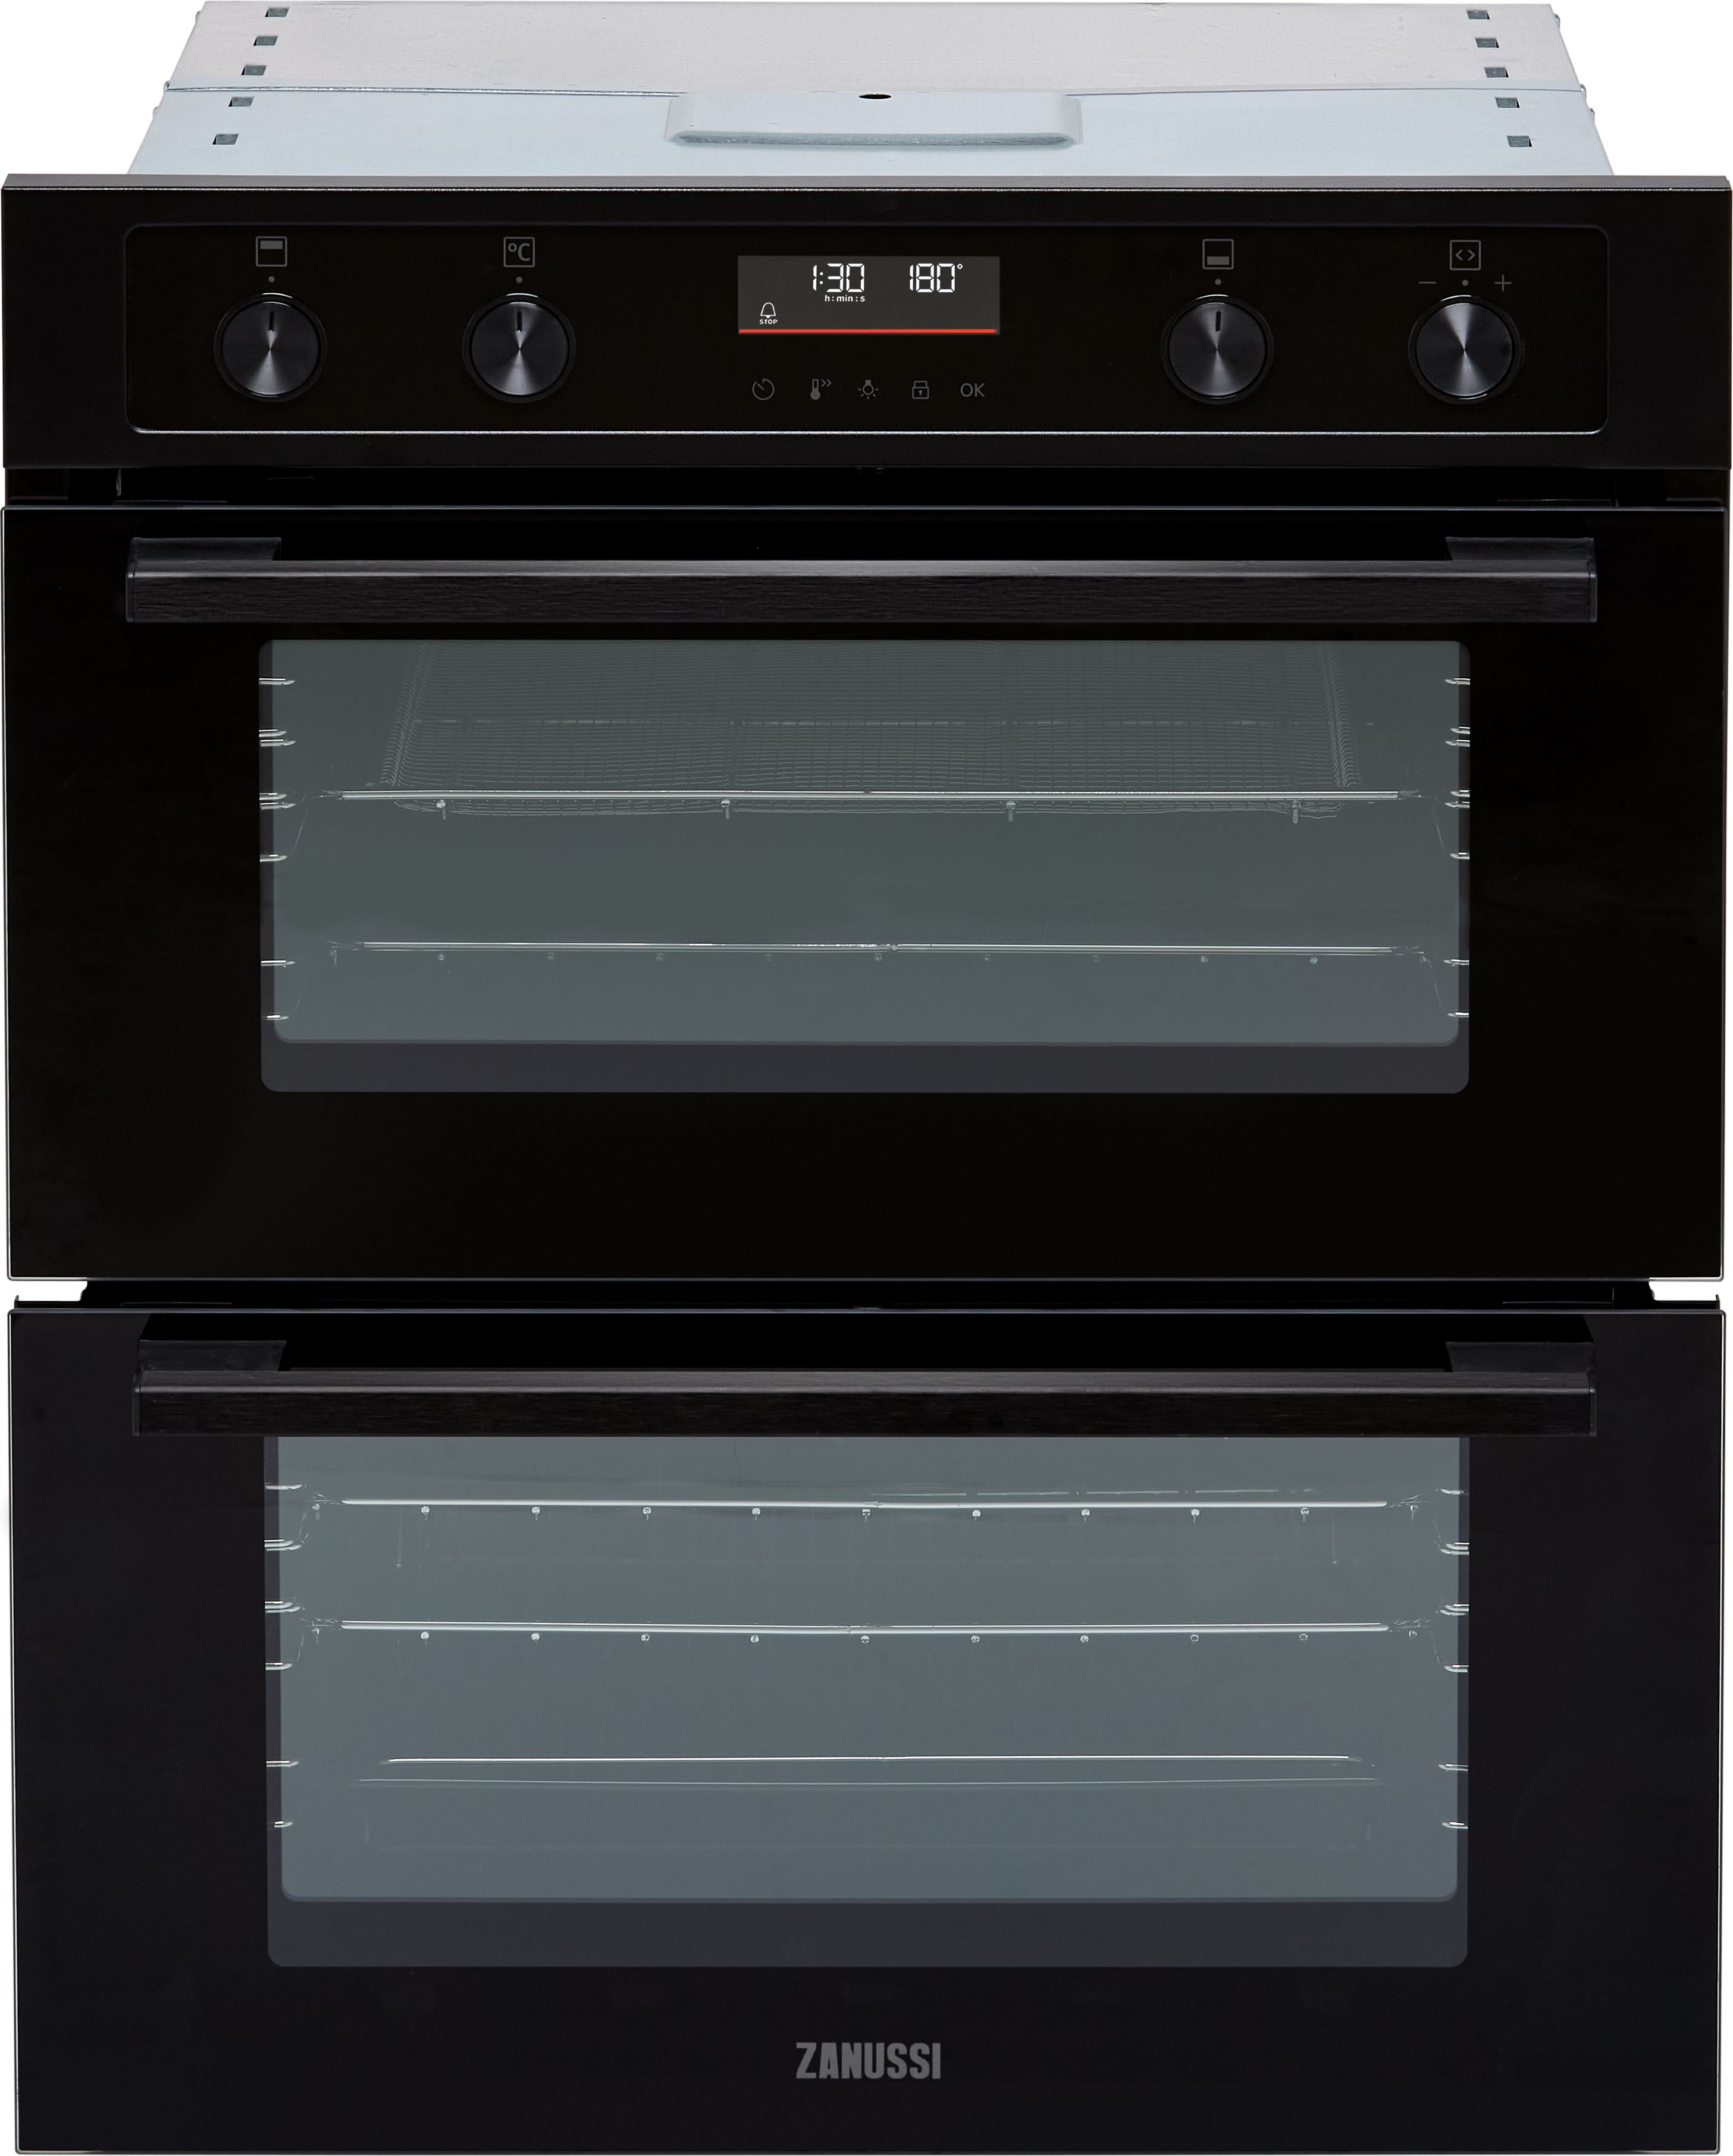 Zanussi Series 40 AirFry ZPCNA7KN Built Under Electric Double Oven - Black - A Rated, Black